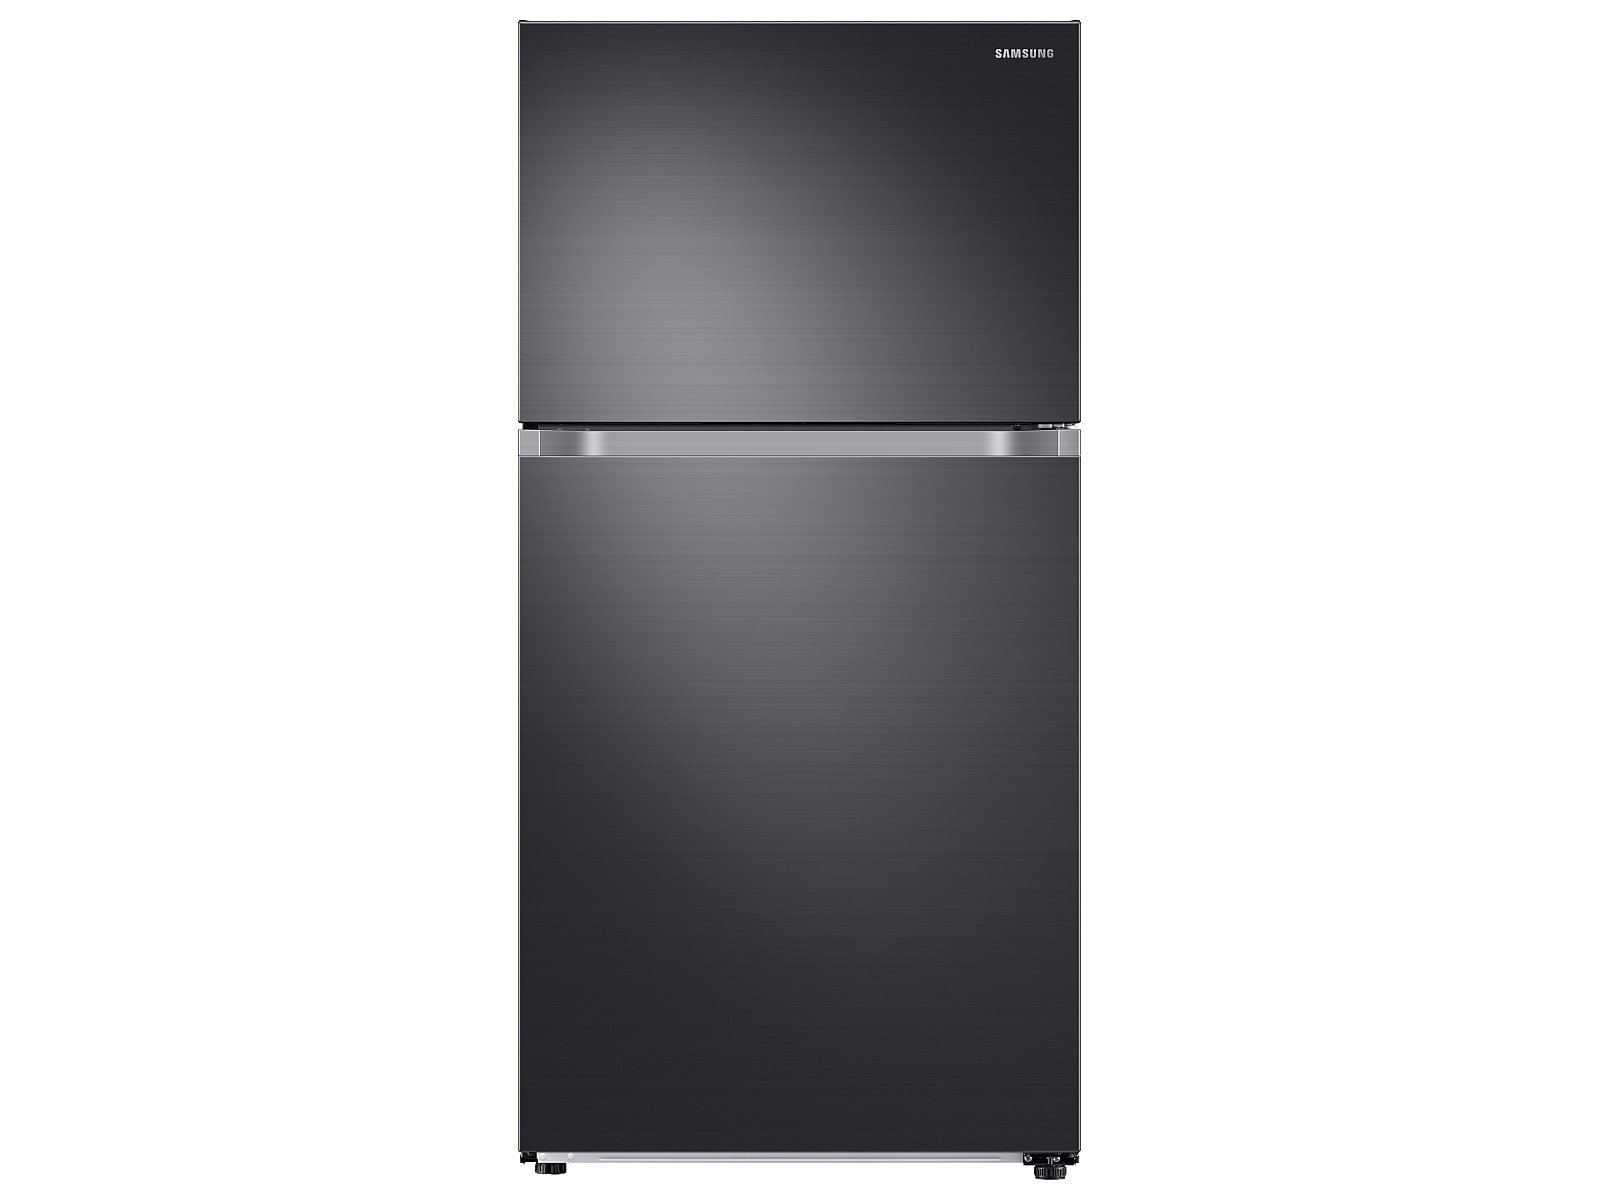 Samsung 21 cu. ft. Top Freezer Refrigerator with FlexZone™ and Ice Maker in Black Stainless Steel(RT21M6215SG/AA) photo